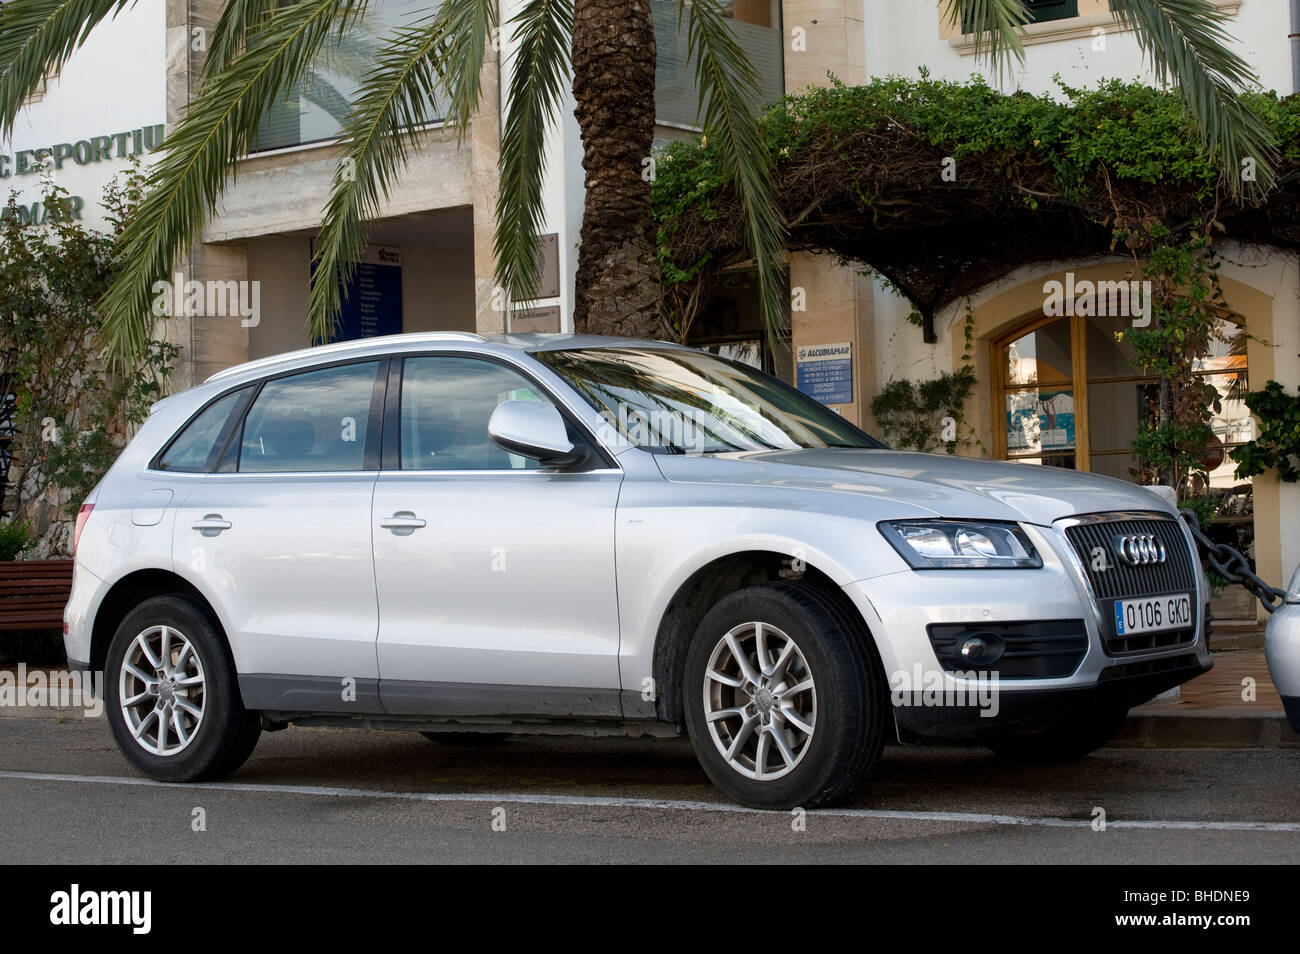 Audi Q5 with Spanish registration plate parked at the side of the road in Spain. Stock Photo